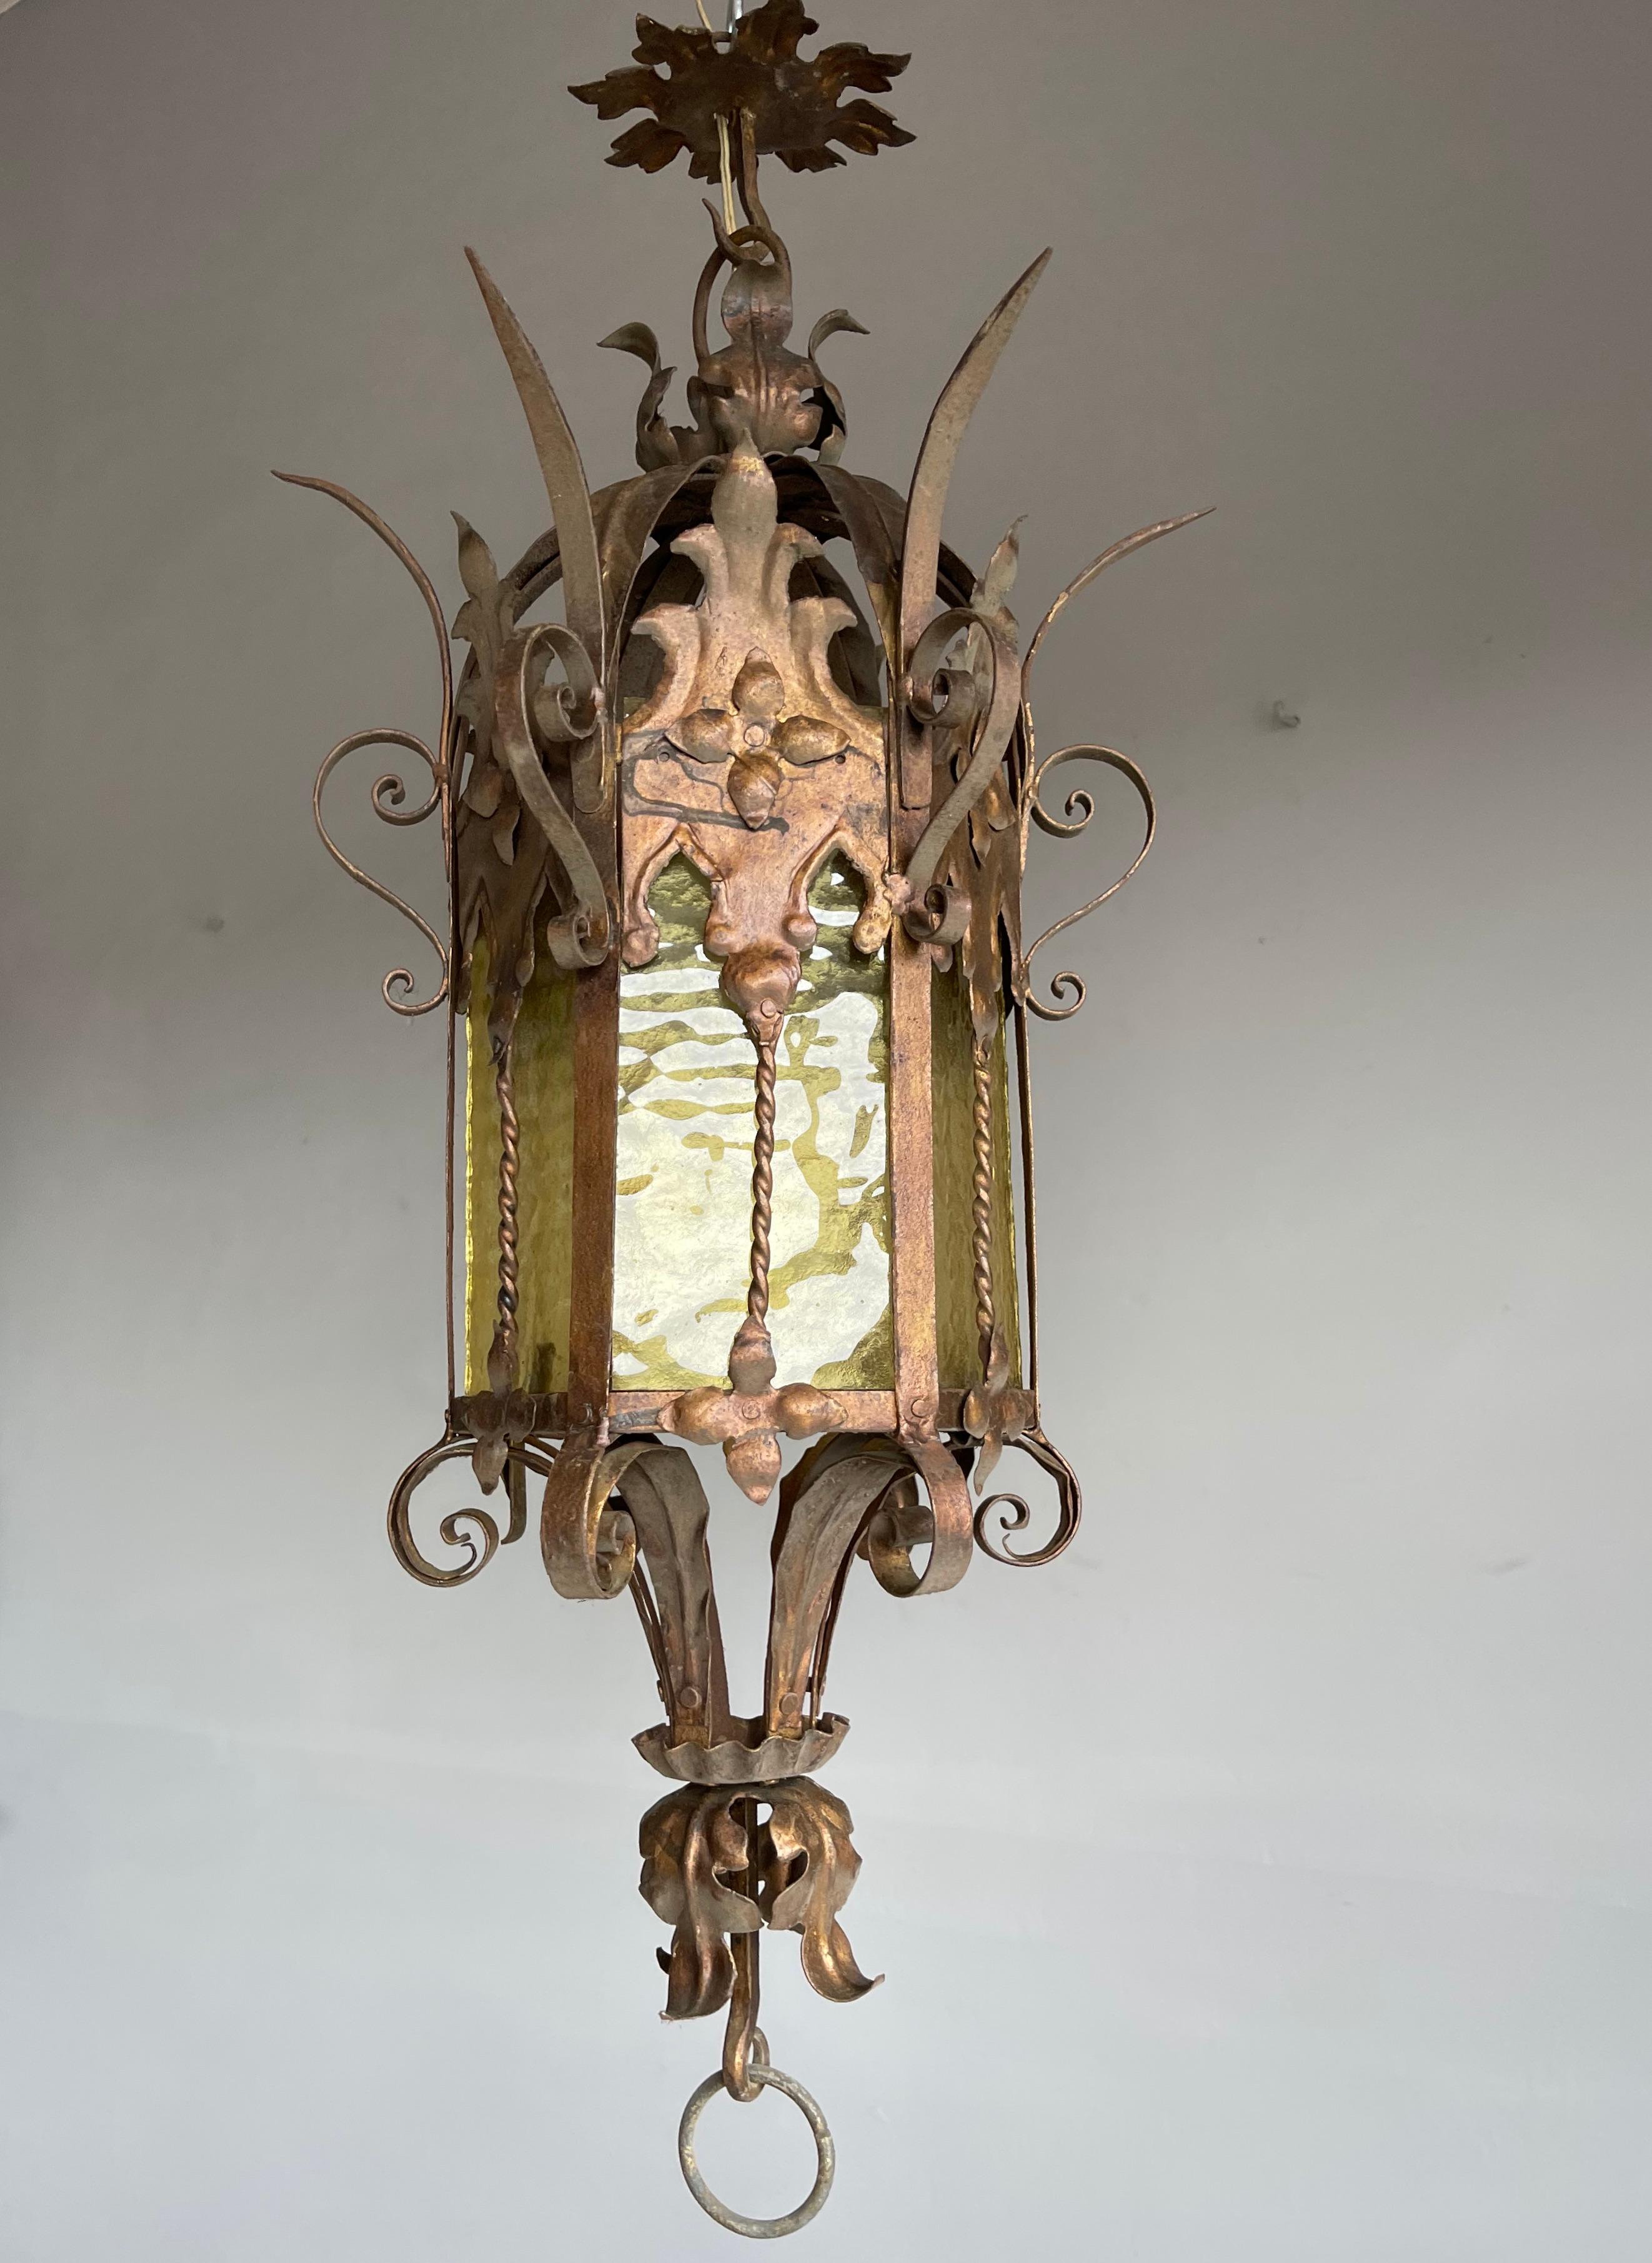 All handcrafted, hexagonal Gothic light lantern.

If you are a collector of rare and ancient looking Gothic antiques then this good size and possibly one of a kind pendant could be flying your way soon. With antique light fixtures as one of our